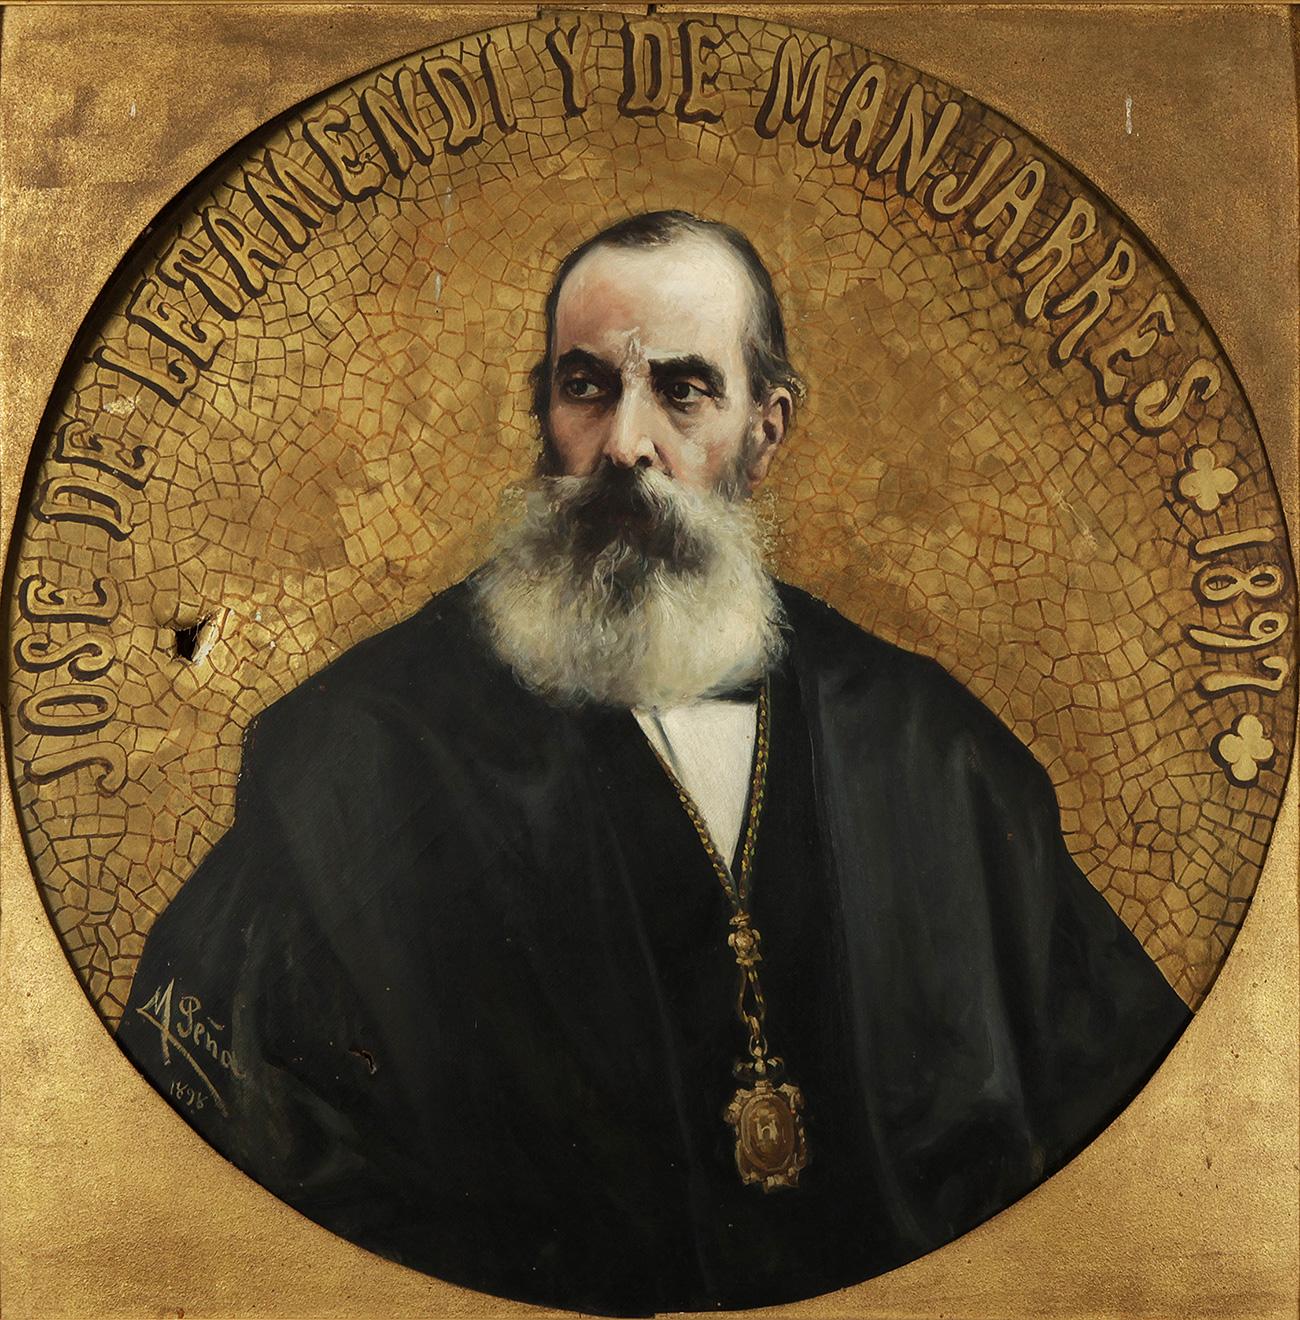 Peña Muñoz, Maximino (Salduero, Soria, 1863 – Madrid, 1940).
Oil on canvas.
Signed, dated (1898) and titled.
For the realization of this work, Maximiliano Peña was based on a photograph taken in 1897, the year of the death of José de Letamendi